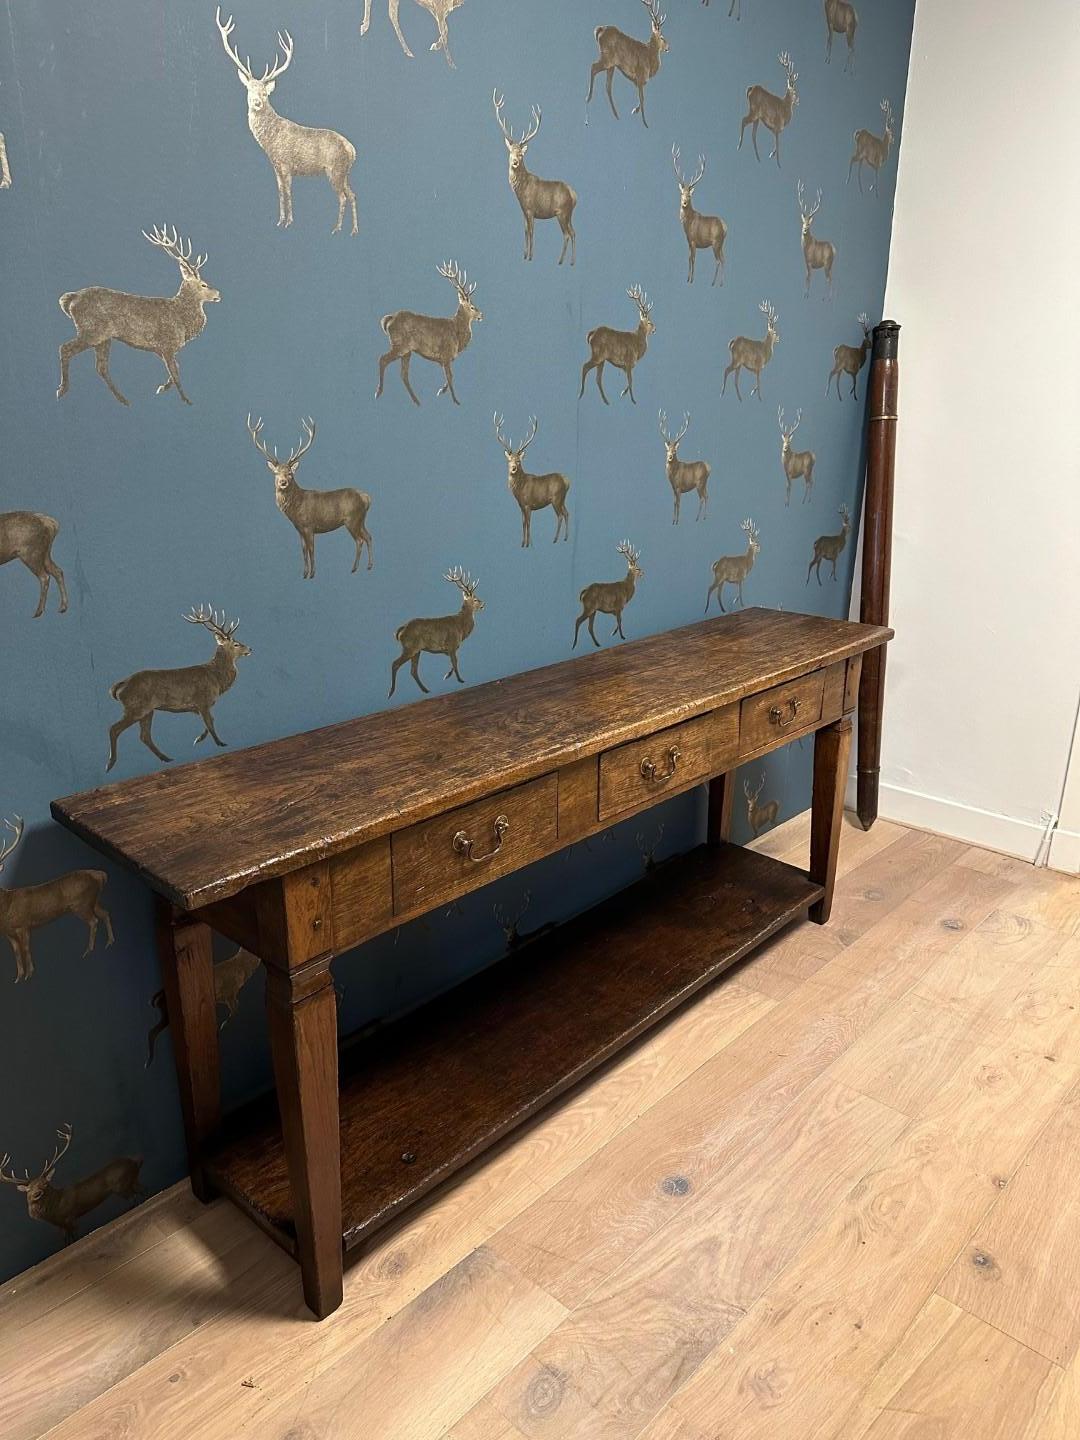 Beautiful weathered teak console table. With 3 drawers and bottom shelf. Completely in perfect condition.
Origin: Dutch East Indies
Period: Approx. 1900
Size: 188cm x 38cm x h.76cm